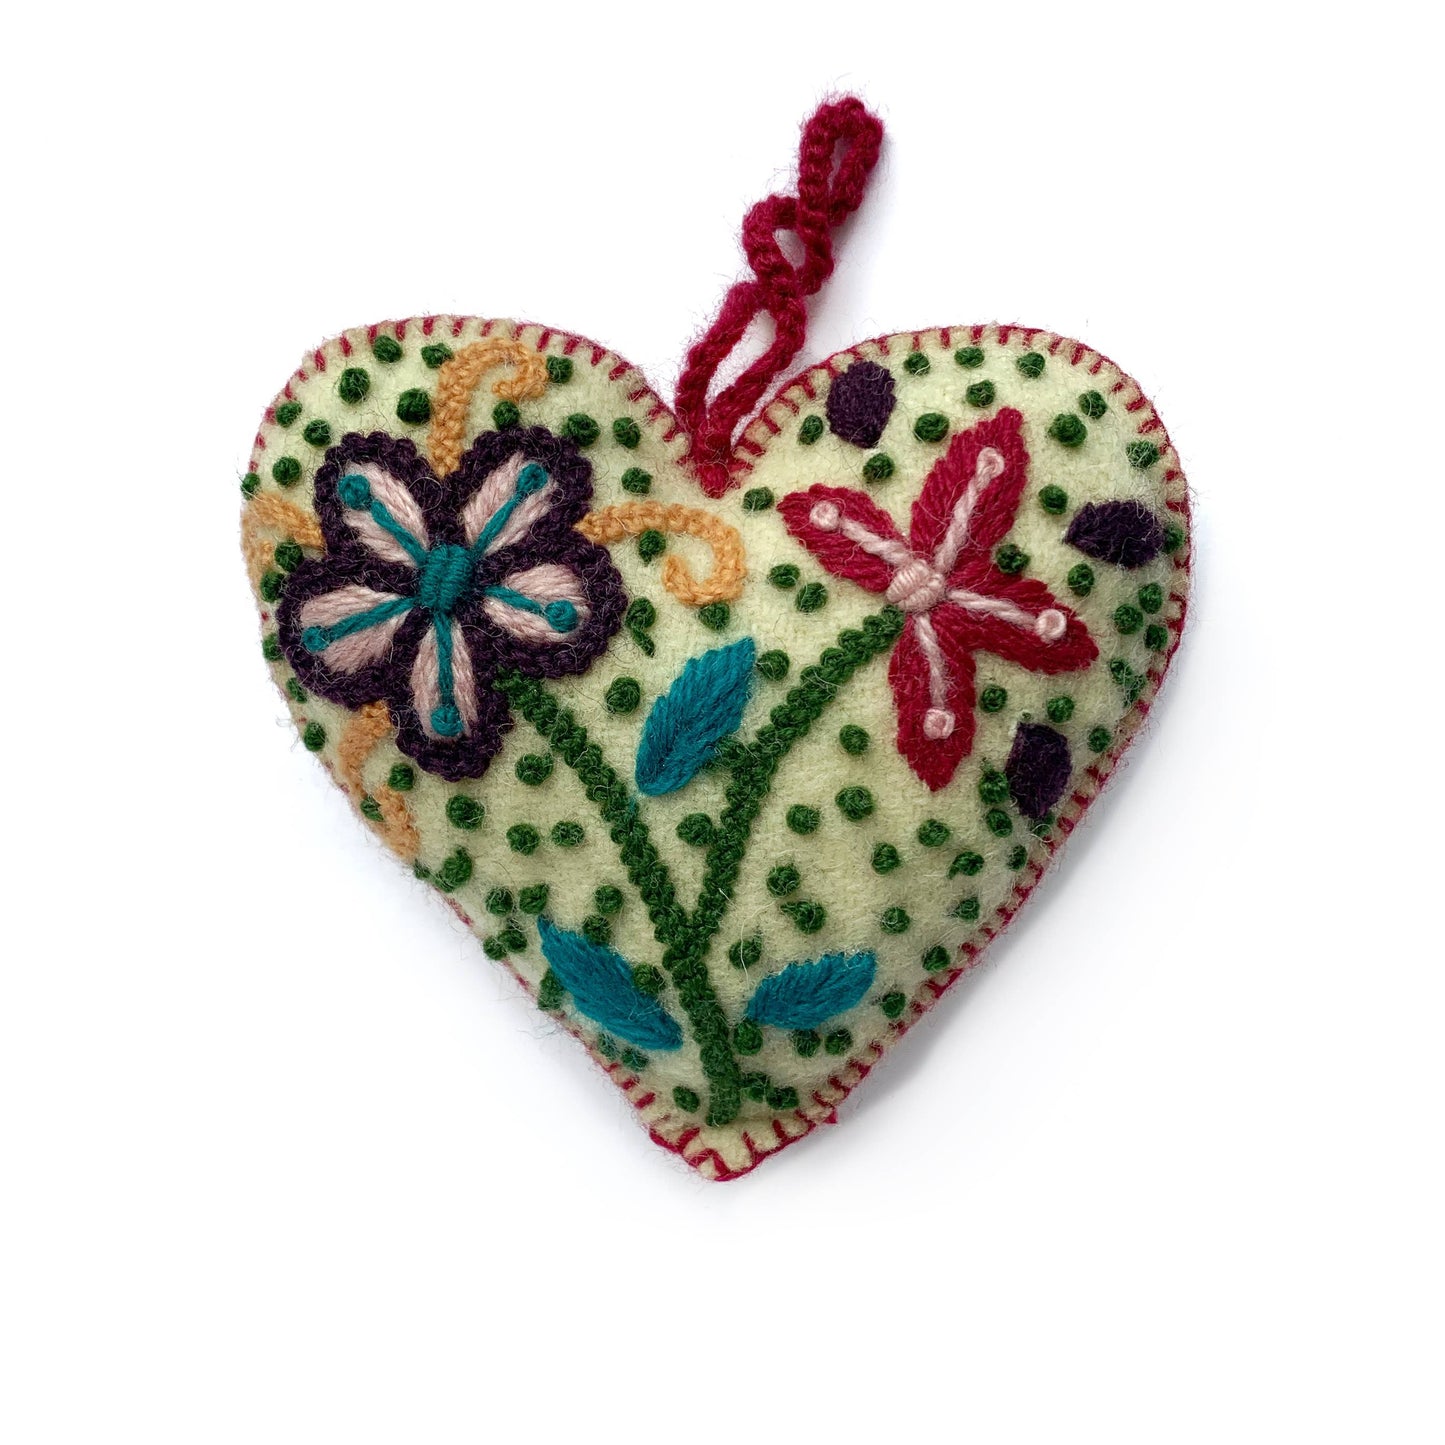 Colorful Embroidered Heart Ornament from Ornaments 4 Orphans